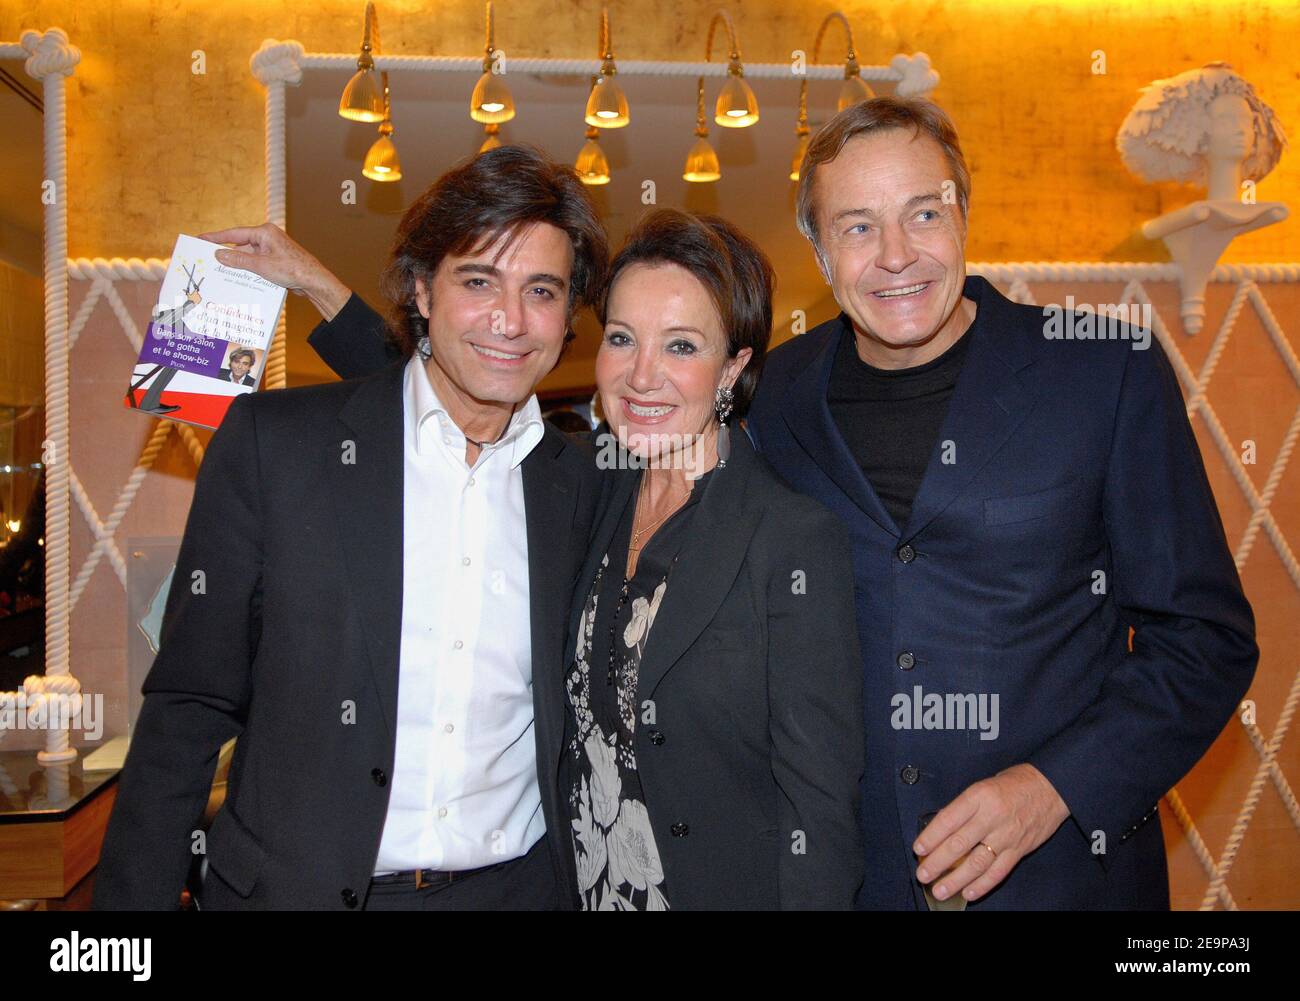 EXCLUSIVE - Star hairstylist Alexandre Zouari, clairvoyant Yaguel Didier and her husband Patrick attend a party for the presentation of Zouaris new book in Paris, France, on November 16, 2006. Photo by Christophe Guibbaud/ABACAPRESS.COM Stock Photo